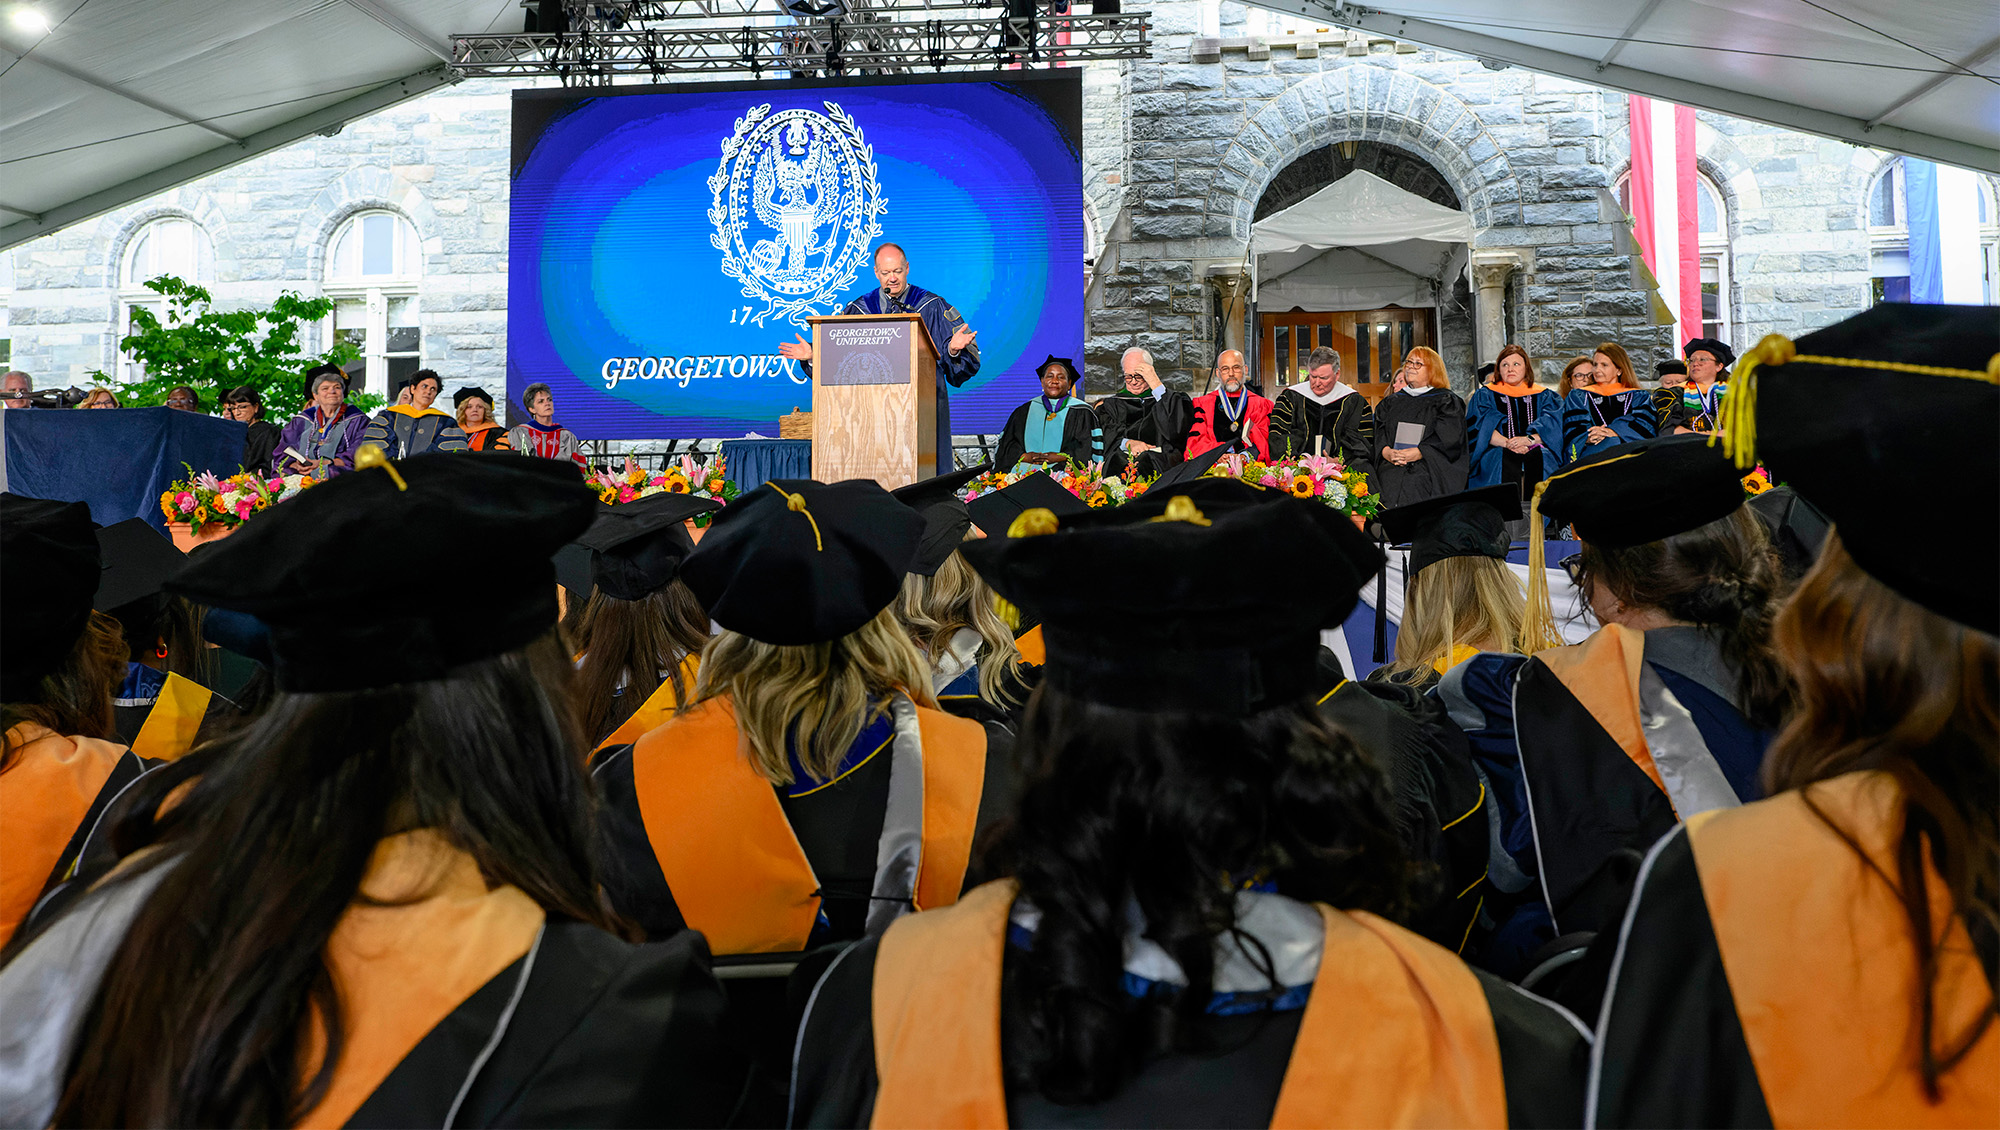 President DeGioia stands at a podium during Commencement looking out at an audience of School of Nursing graduates, behind him are seated school faculty